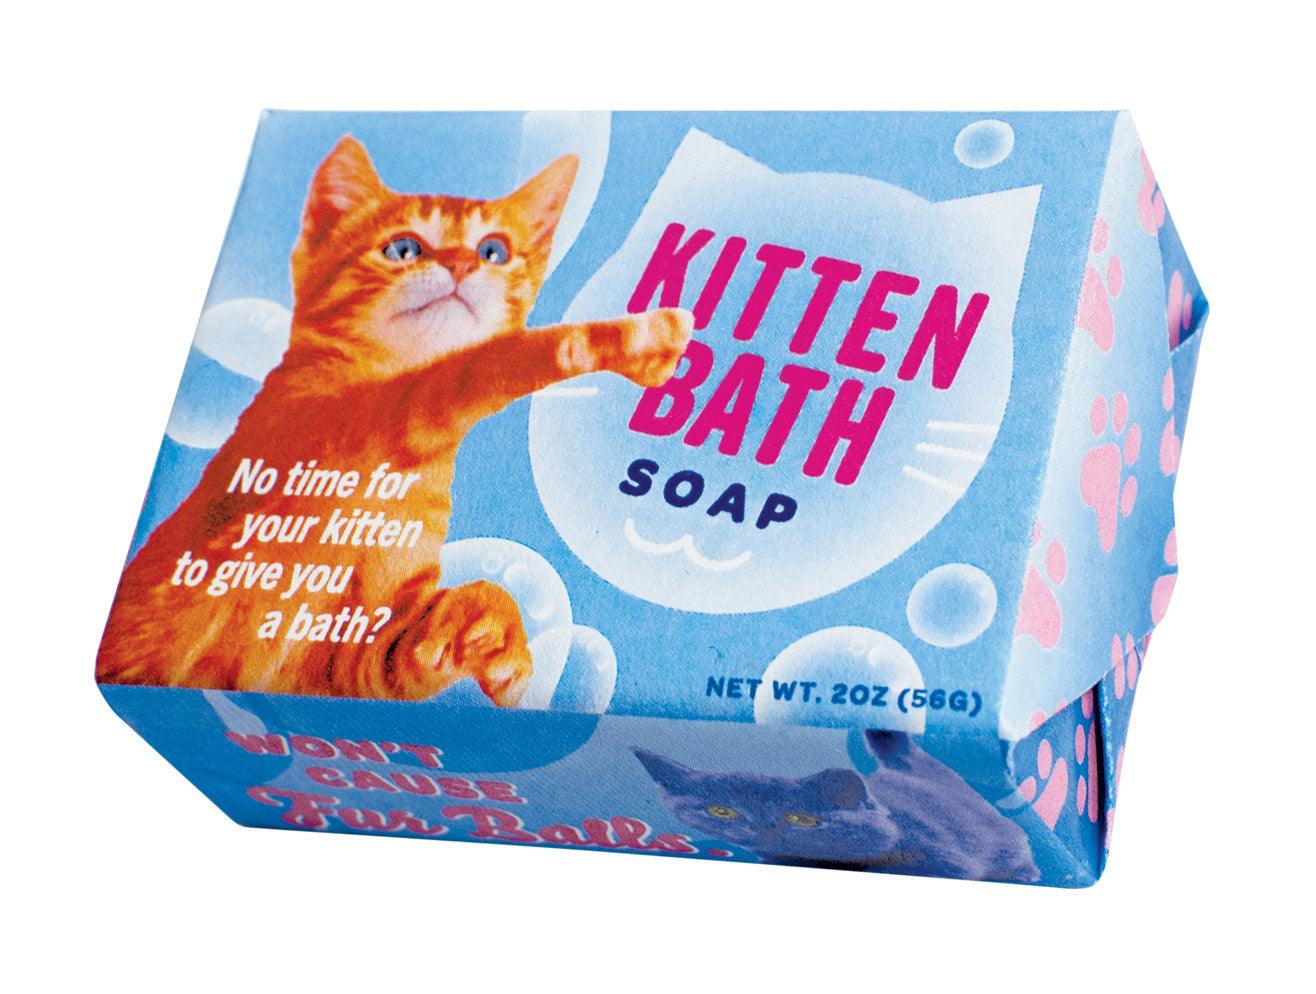 Product photo of Kitten Bath Soap, a novelty gift manufactured by The Unemployed Philosophers Guild.